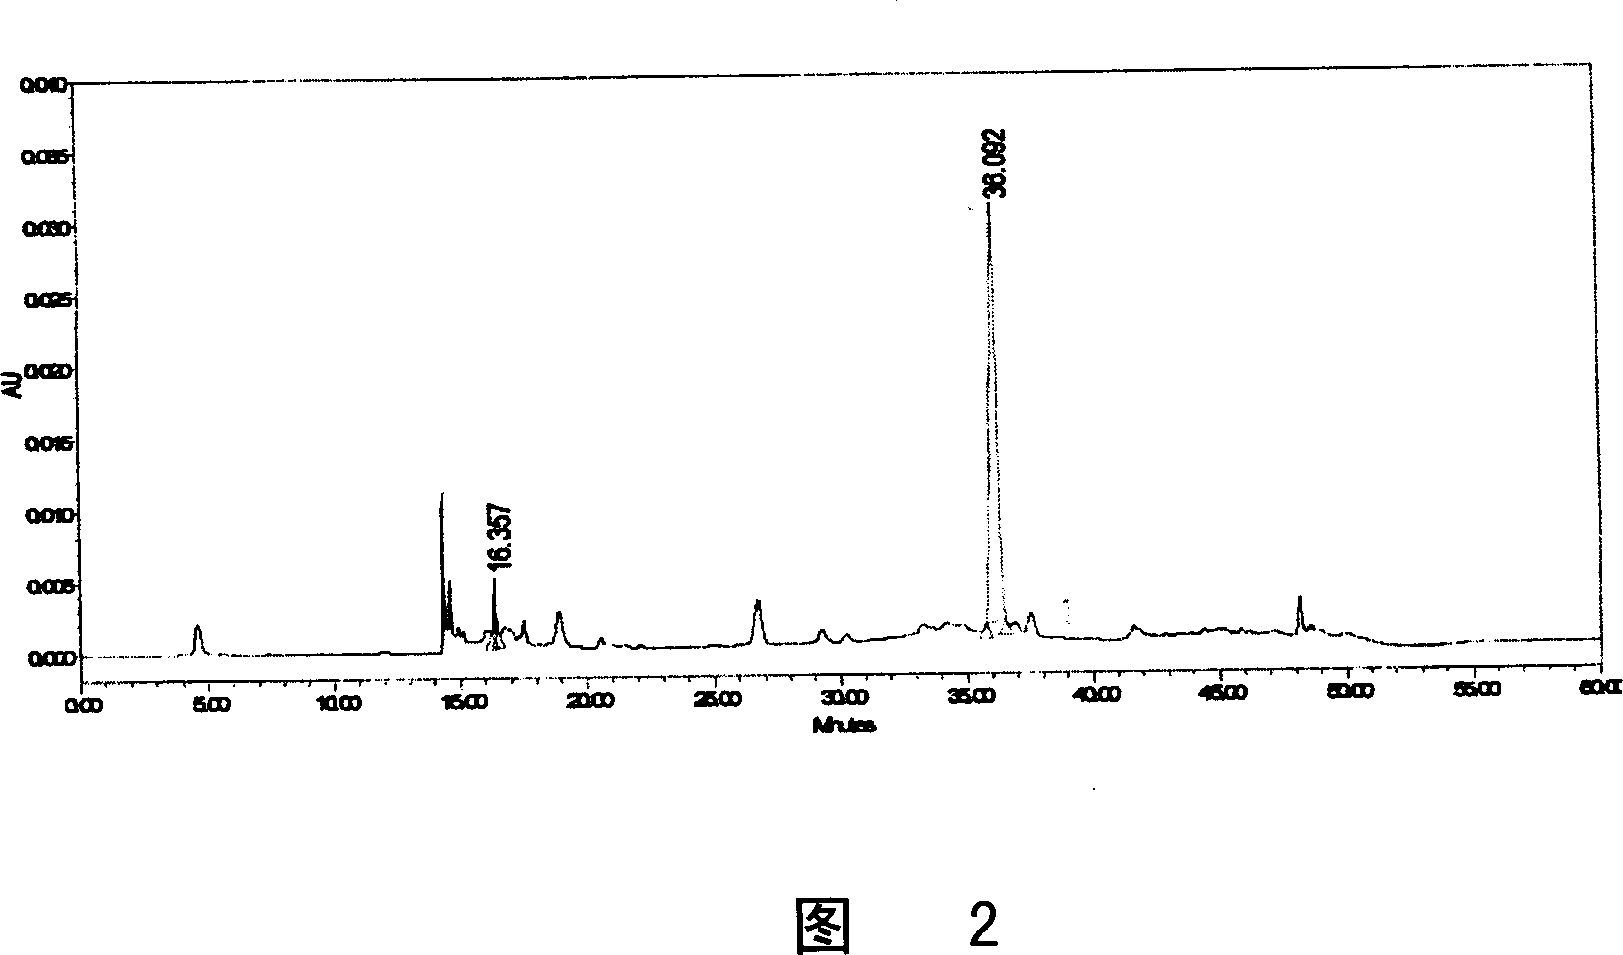 Monomer quick-effective insulin and preparation method and usage thereof